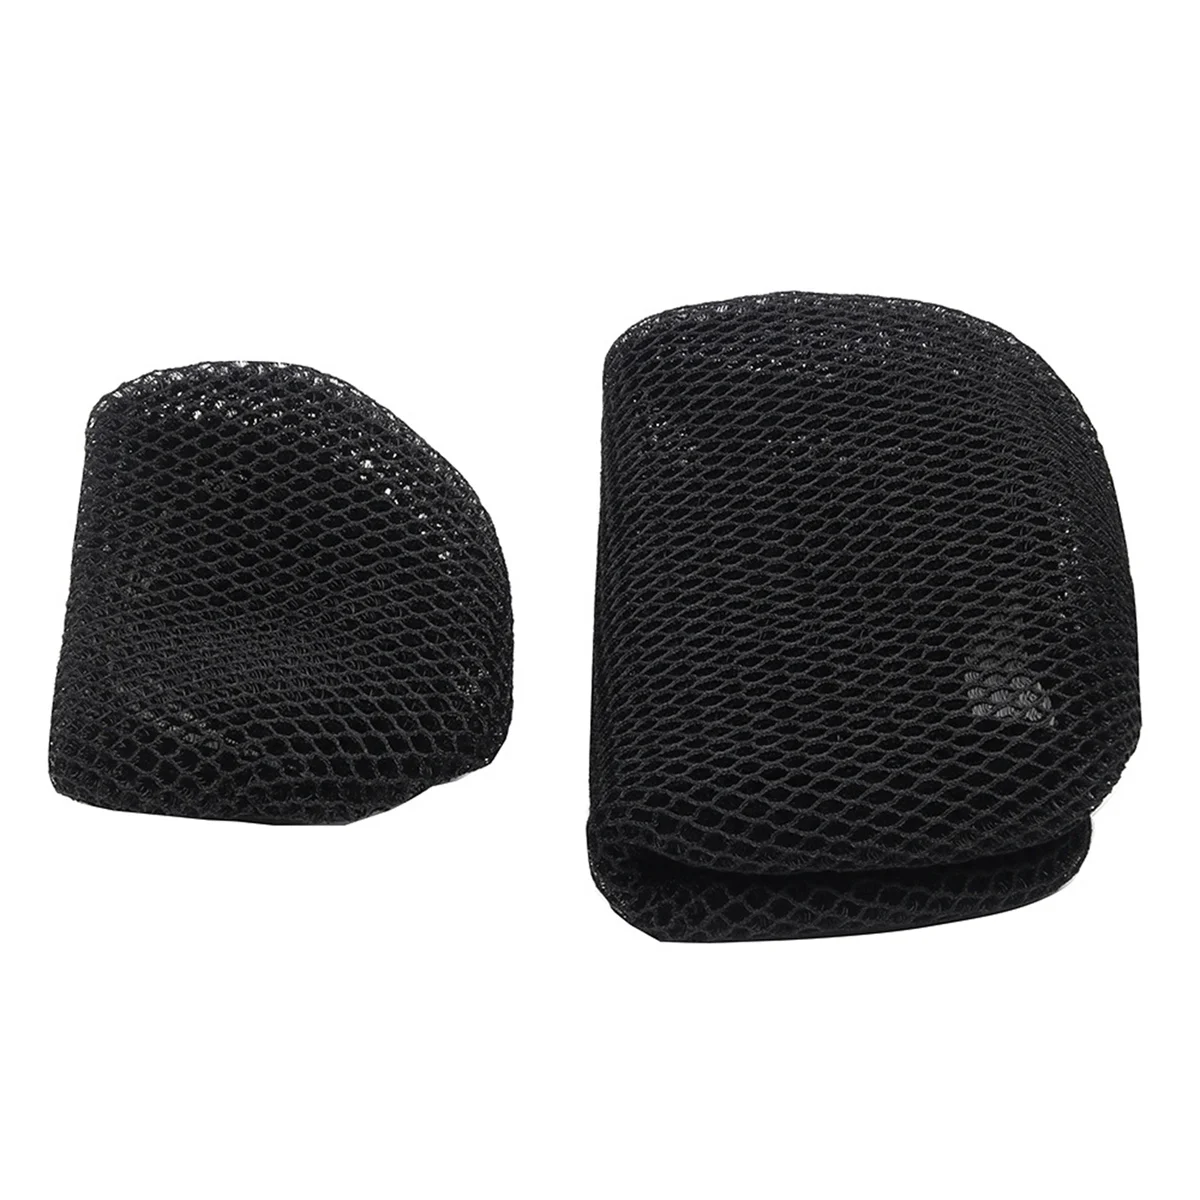 Motorcycle 3D Mesh Net Cover Cushion Guard Pad Insulation Breathable for MT-07 MT07 2013-2017 images - 6